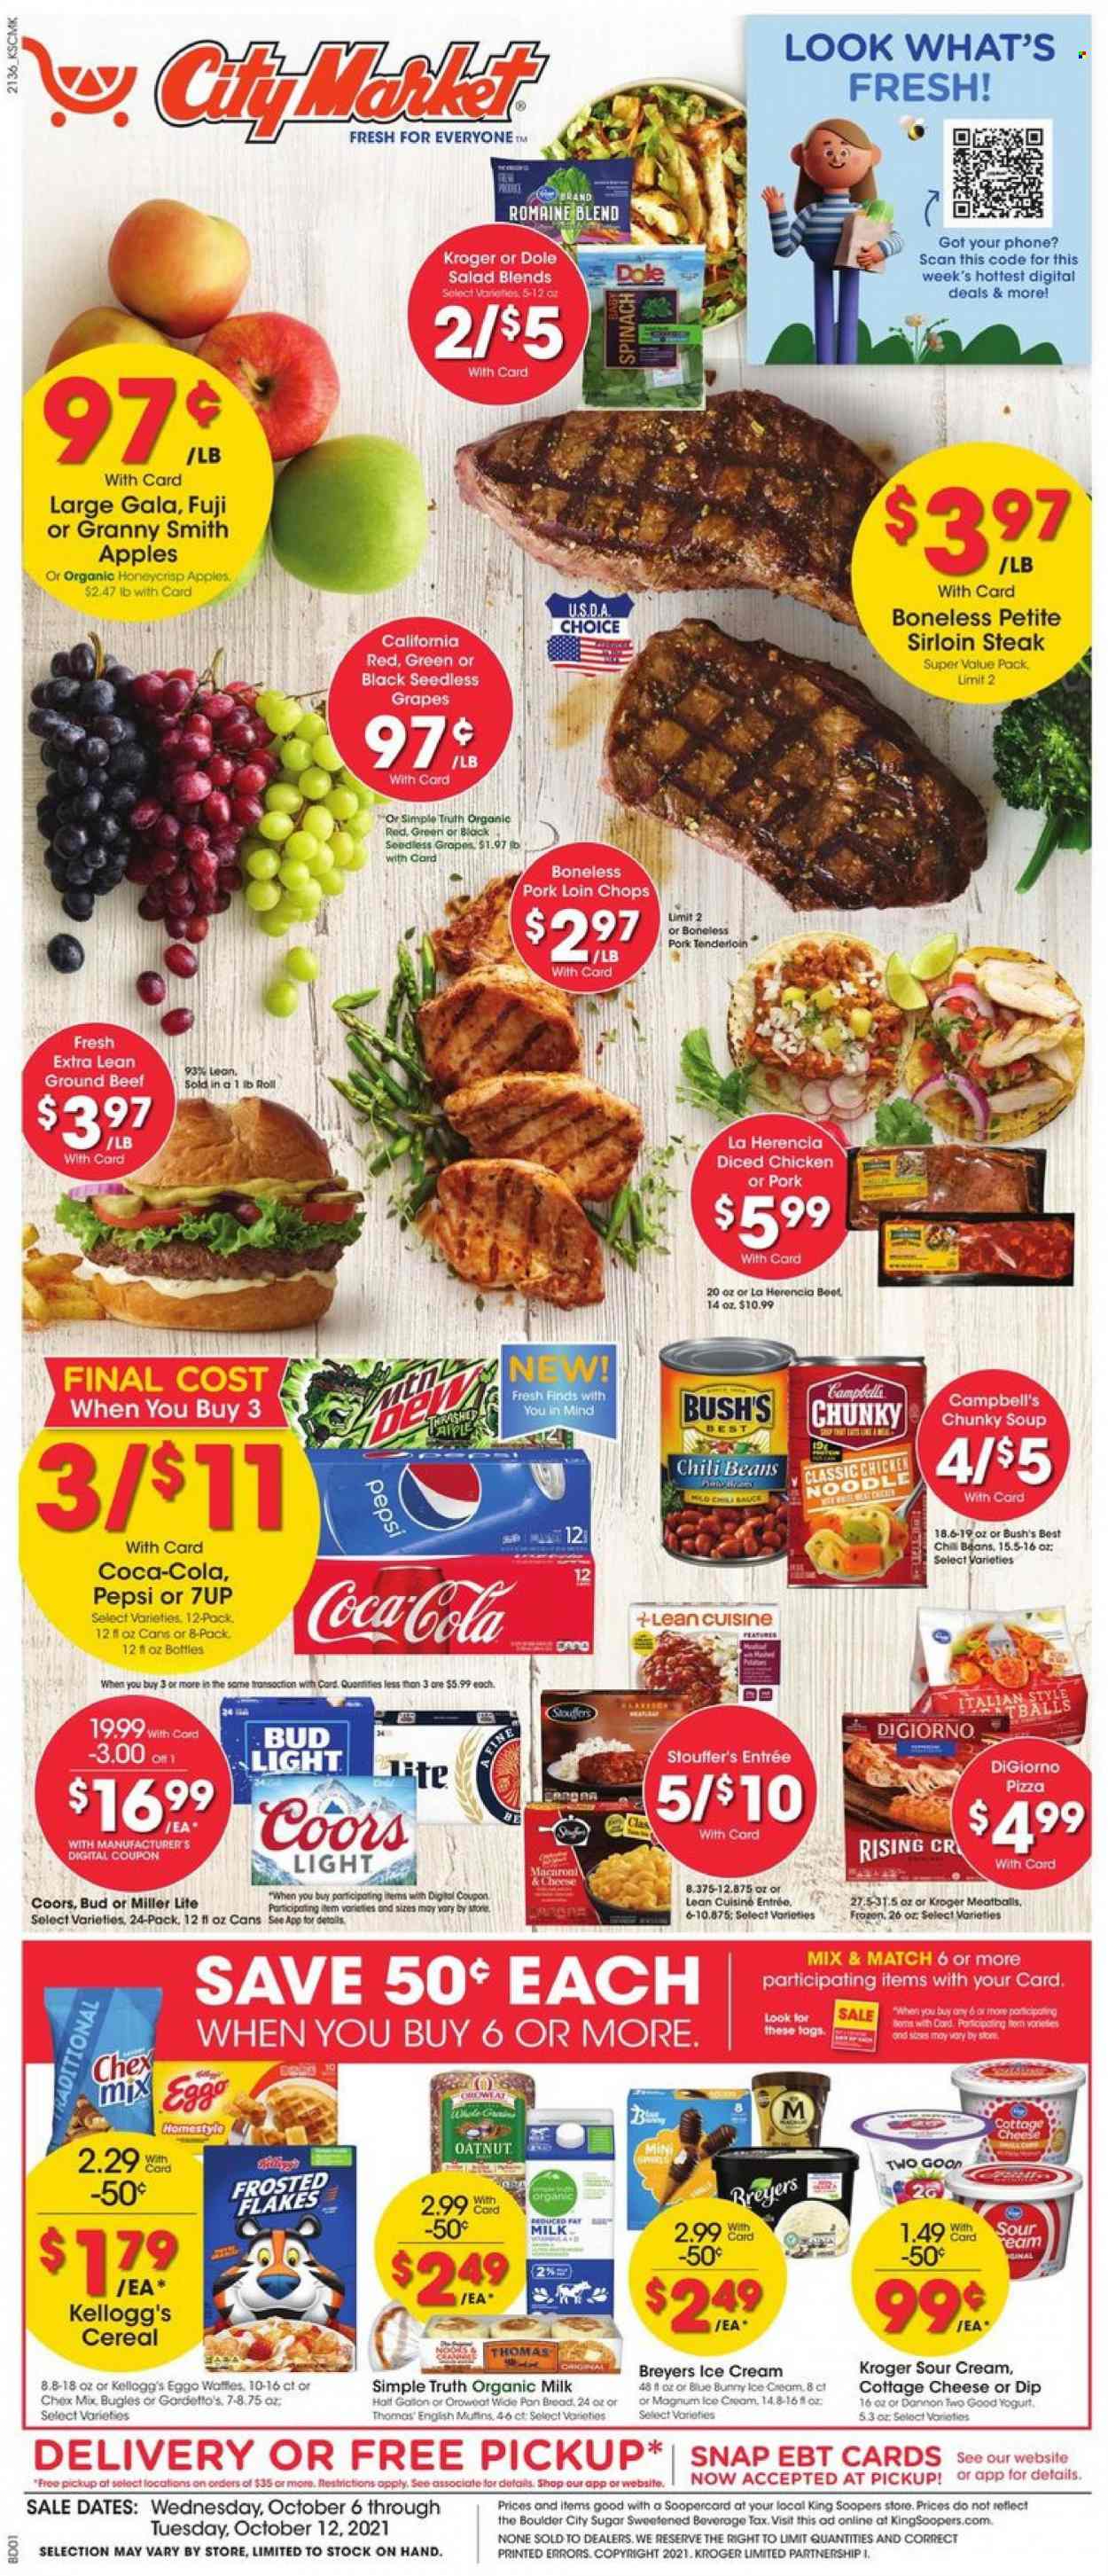 thumbnail - City Market Flyer - 10/06/2021 - 10/12/2021 - Sales products - seedless grapes, salad, Dole, apples, Gala, grapes, Granny Smith, Campbell's, pizza, soup, noodles, Lean Cuisine, cottage cheese, yoghurt, organic milk, sour cream, dip, Magnum, ice cream, Blue Bunny, Stouffer's, Kellogg's, Chex Mix, chili beans, cereals, Frosted Flakes, Coca-Cola, Pepsi, 7UP, beer, Bud Light, beef meat, beef sirloin, ground beef, steak, sirloin steak, pork chops, pork loin, pork meat, pork tenderloin, Miller Lite, Coors. Page 1.